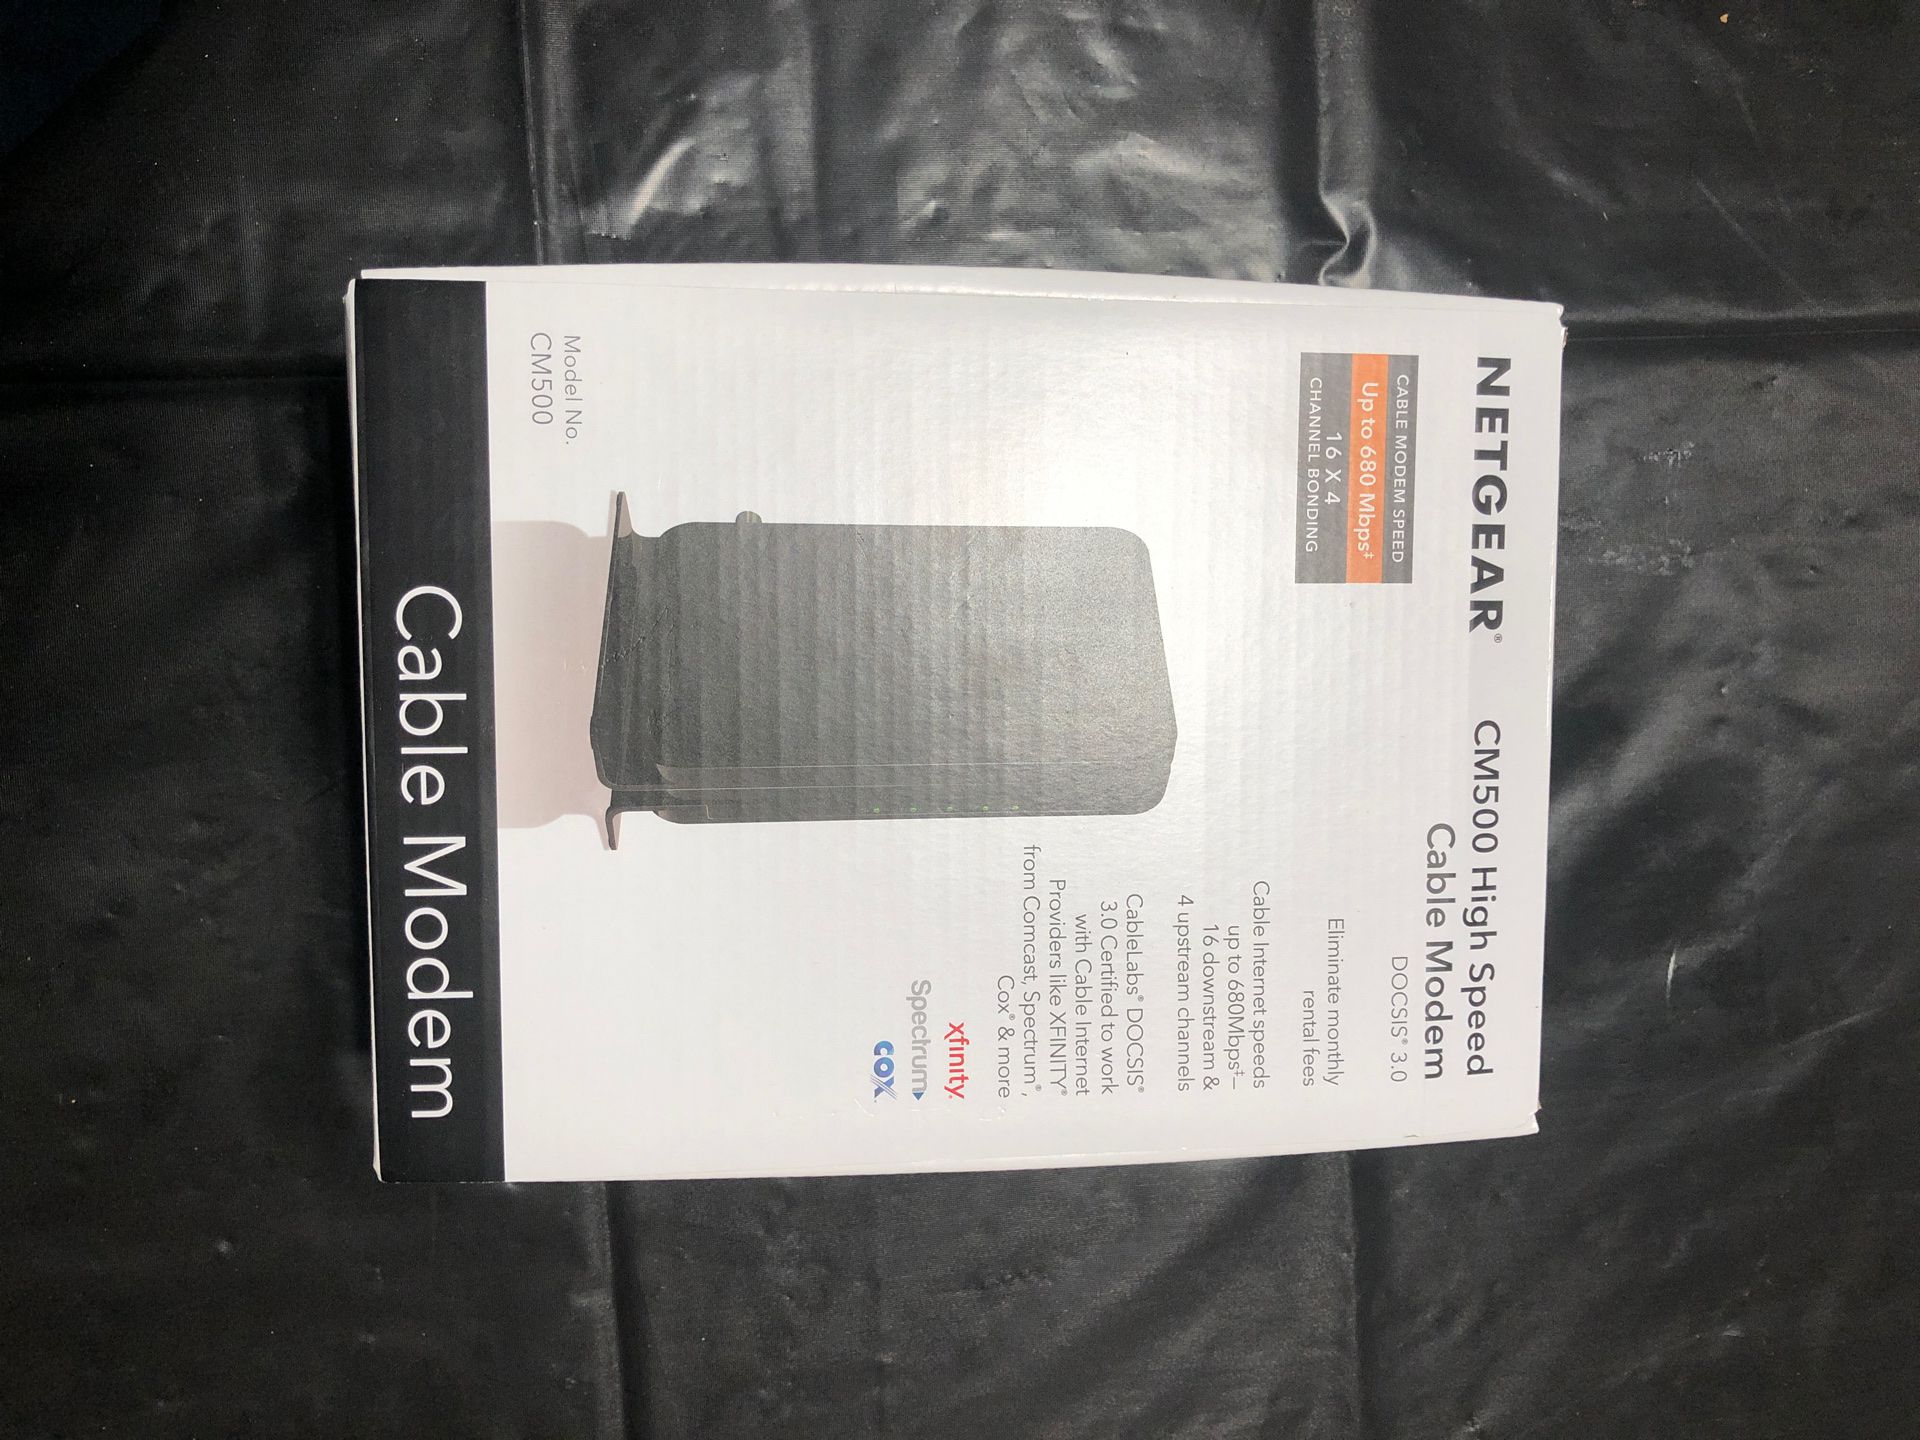 Cable modem CM 500 high ( just upgraded don’t need nome)